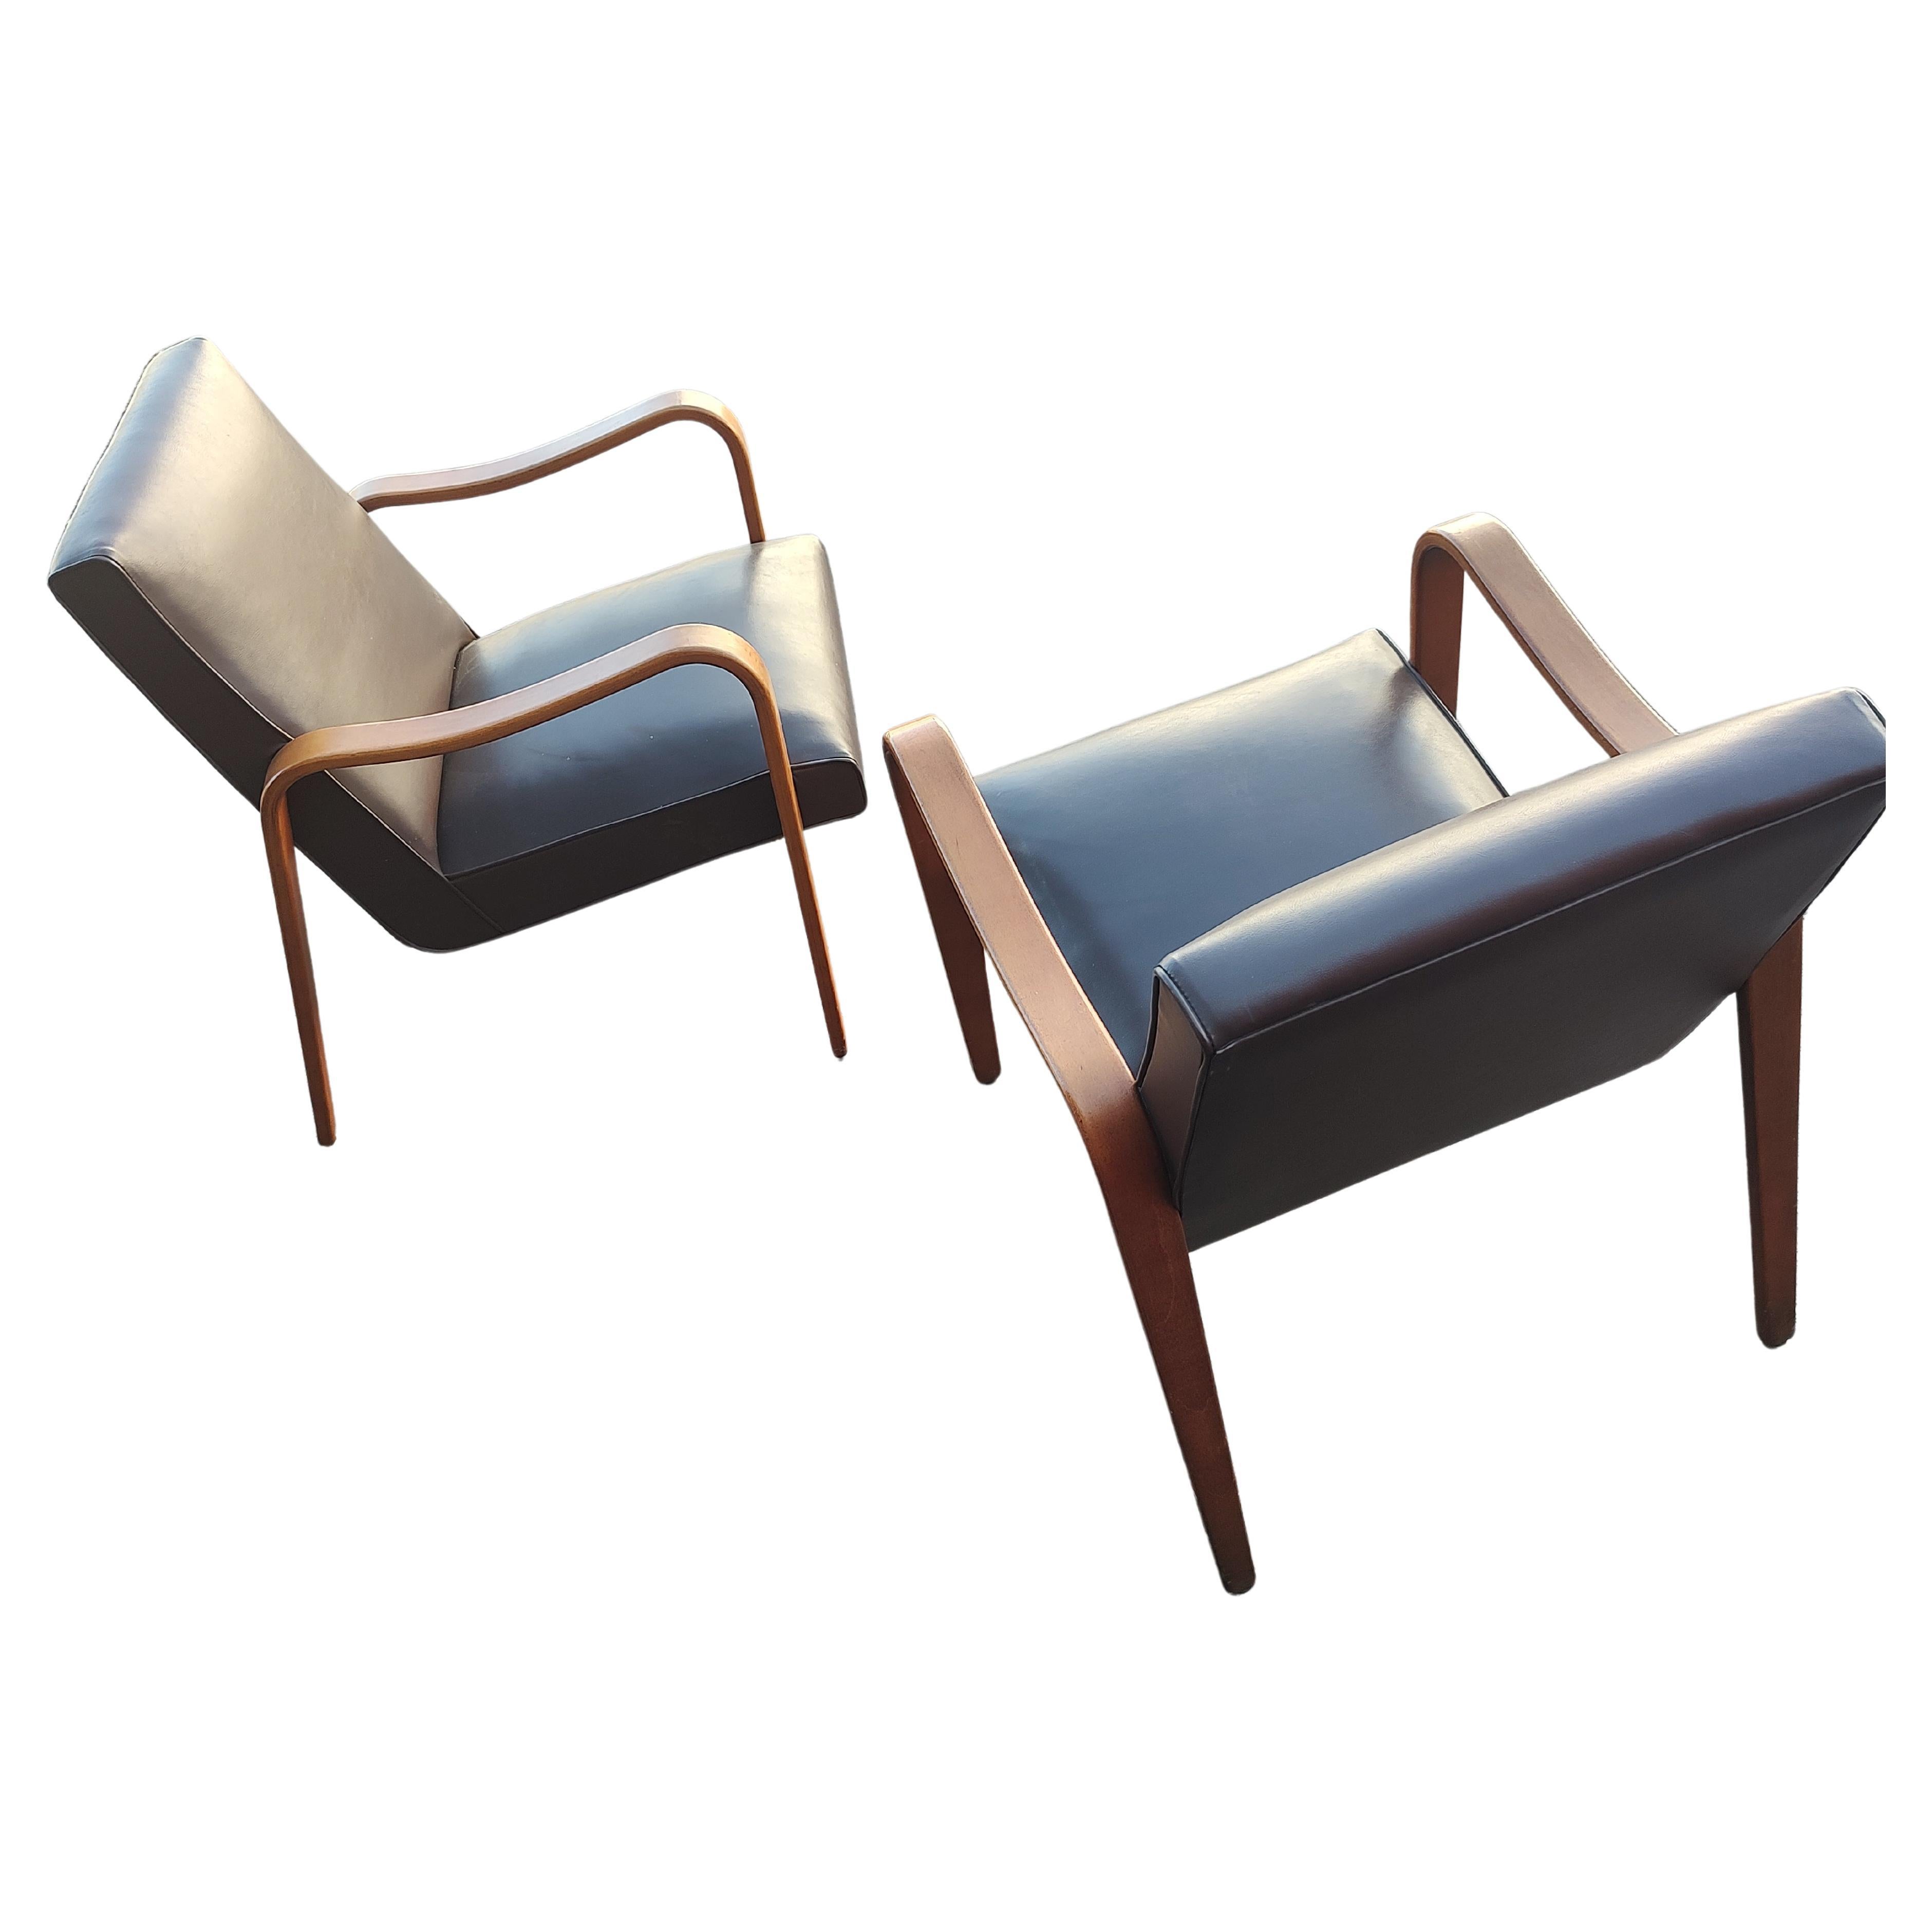 Mid Century Modern Sculptural Bent Arm Lounge Chairs in Birch by Thonet In Good Condition For Sale In Port Jervis, NY